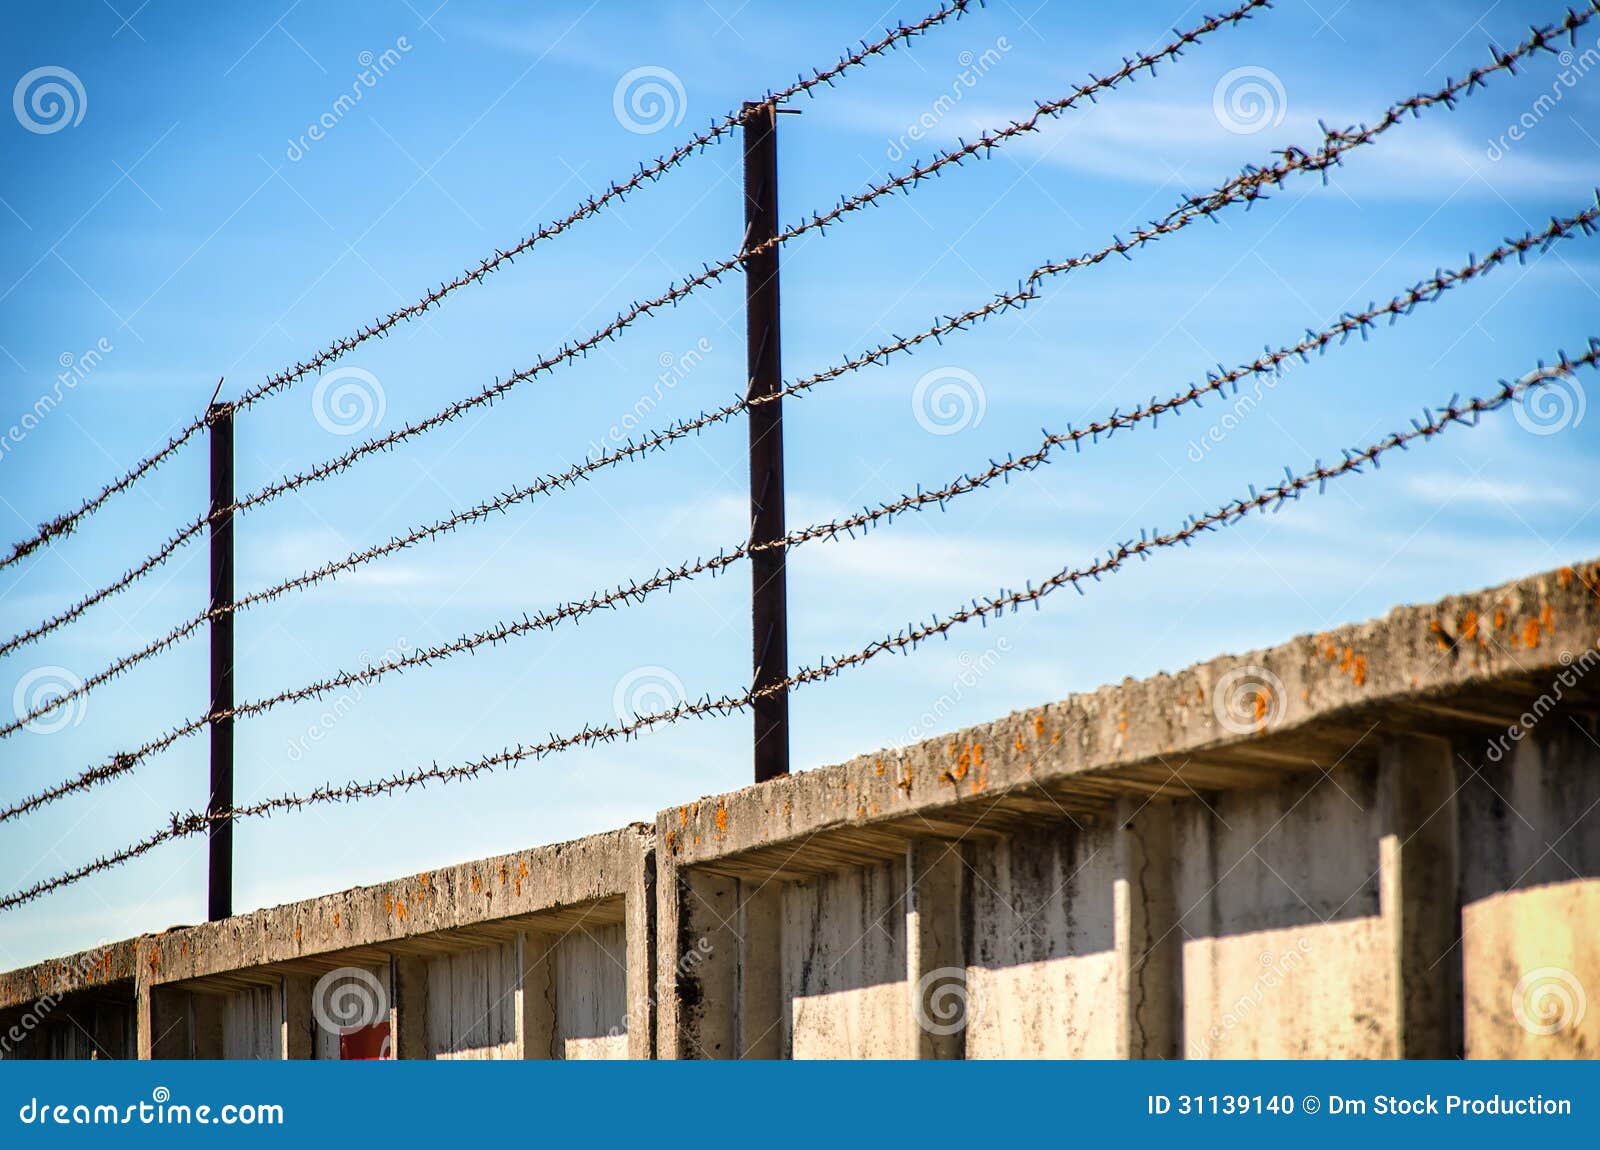 Fence stock photo. Image of freedom, fence, steel, outdoor - 31139140
